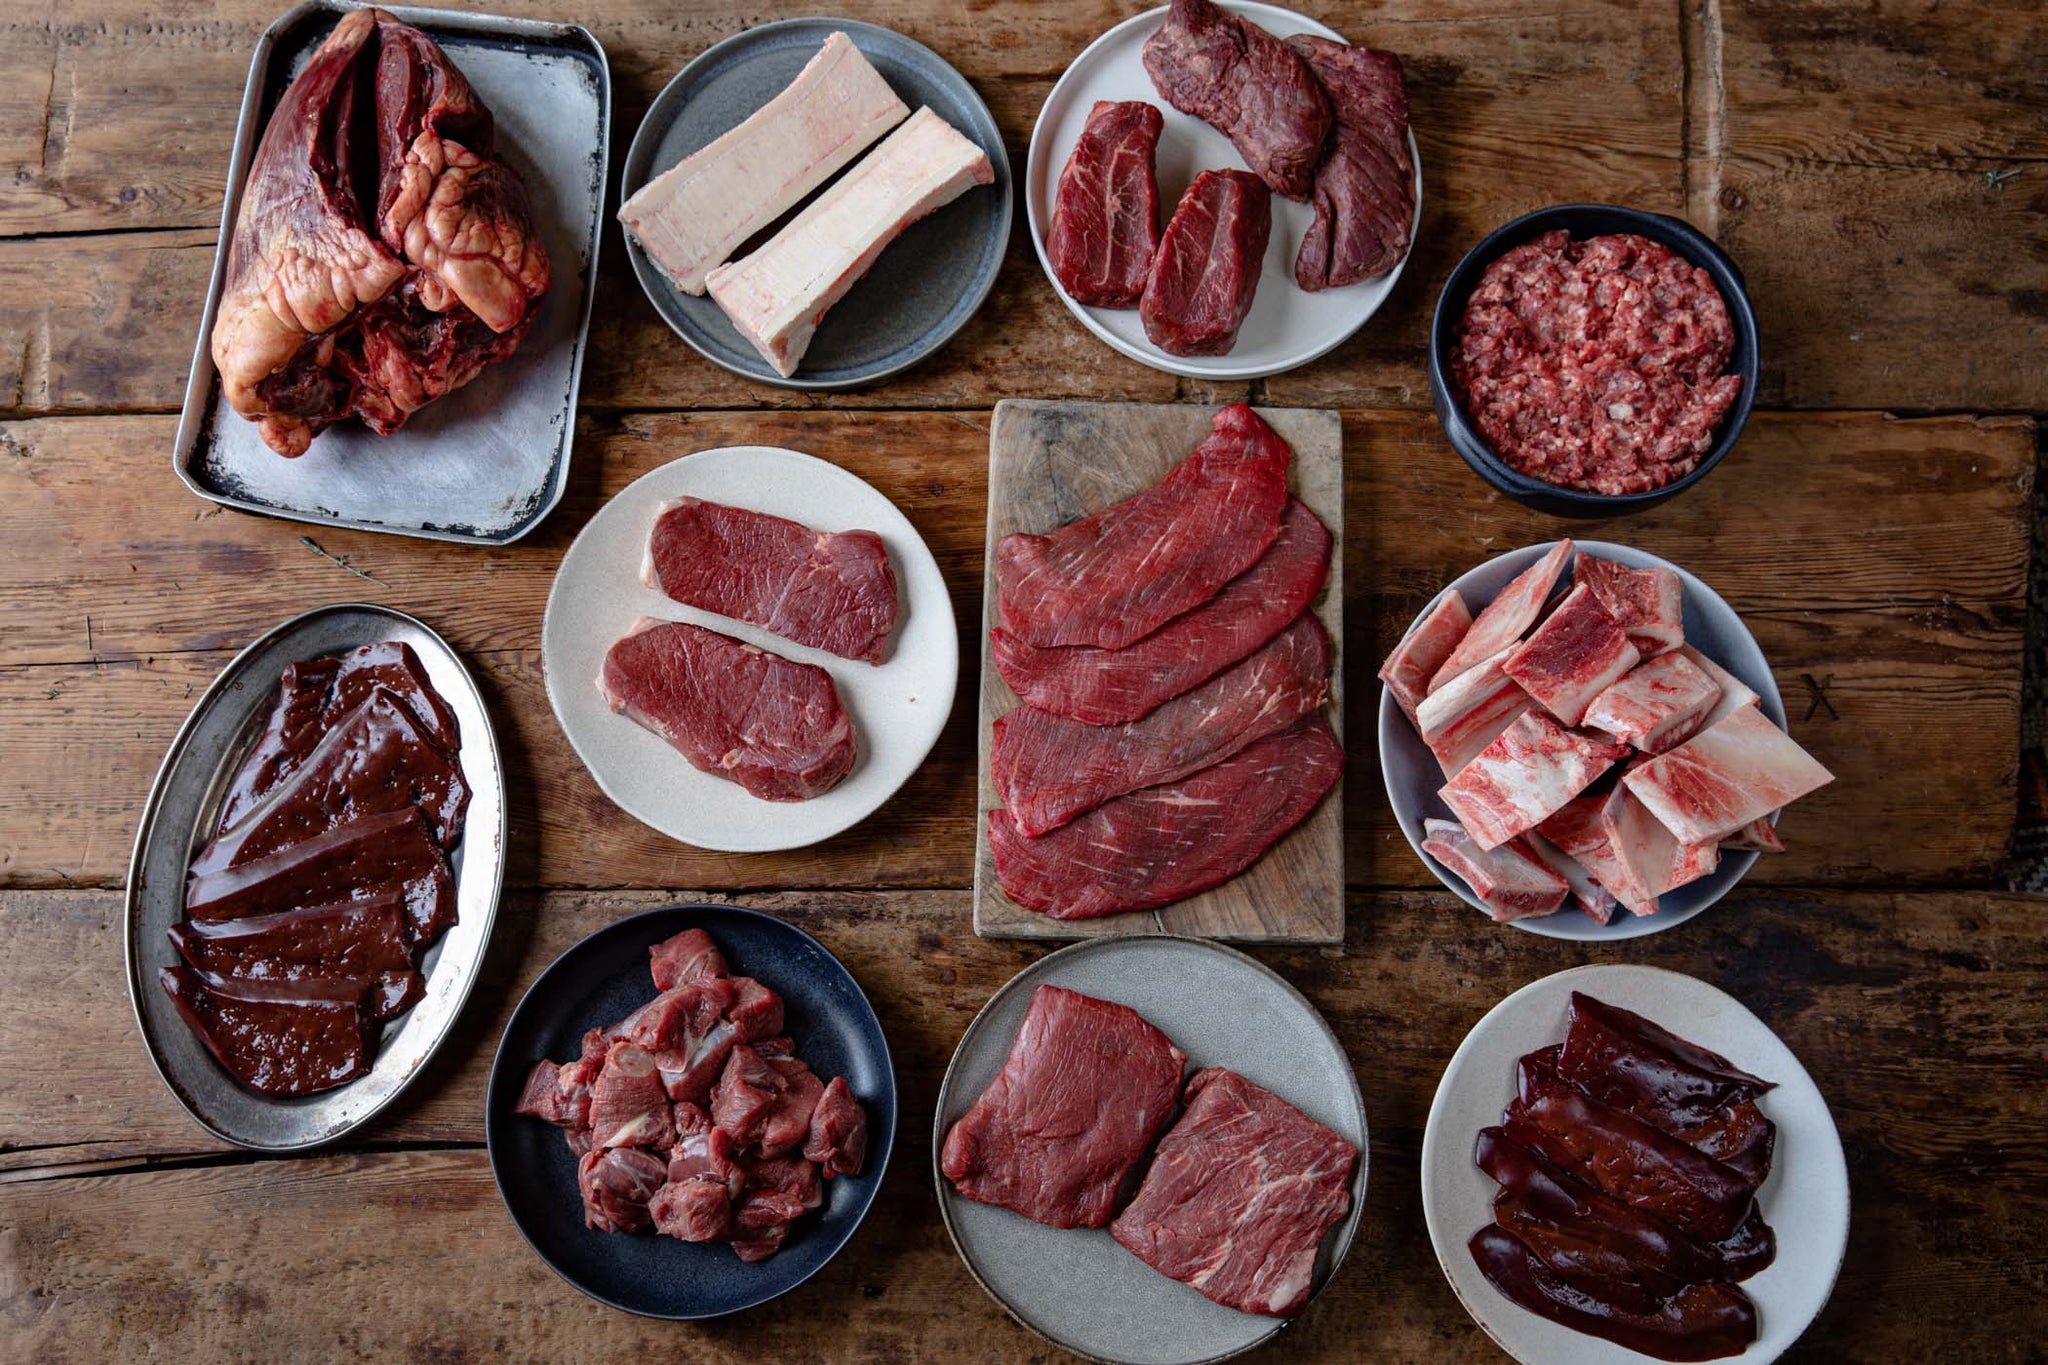 The Swaledale Nutritionist’s Meat Box